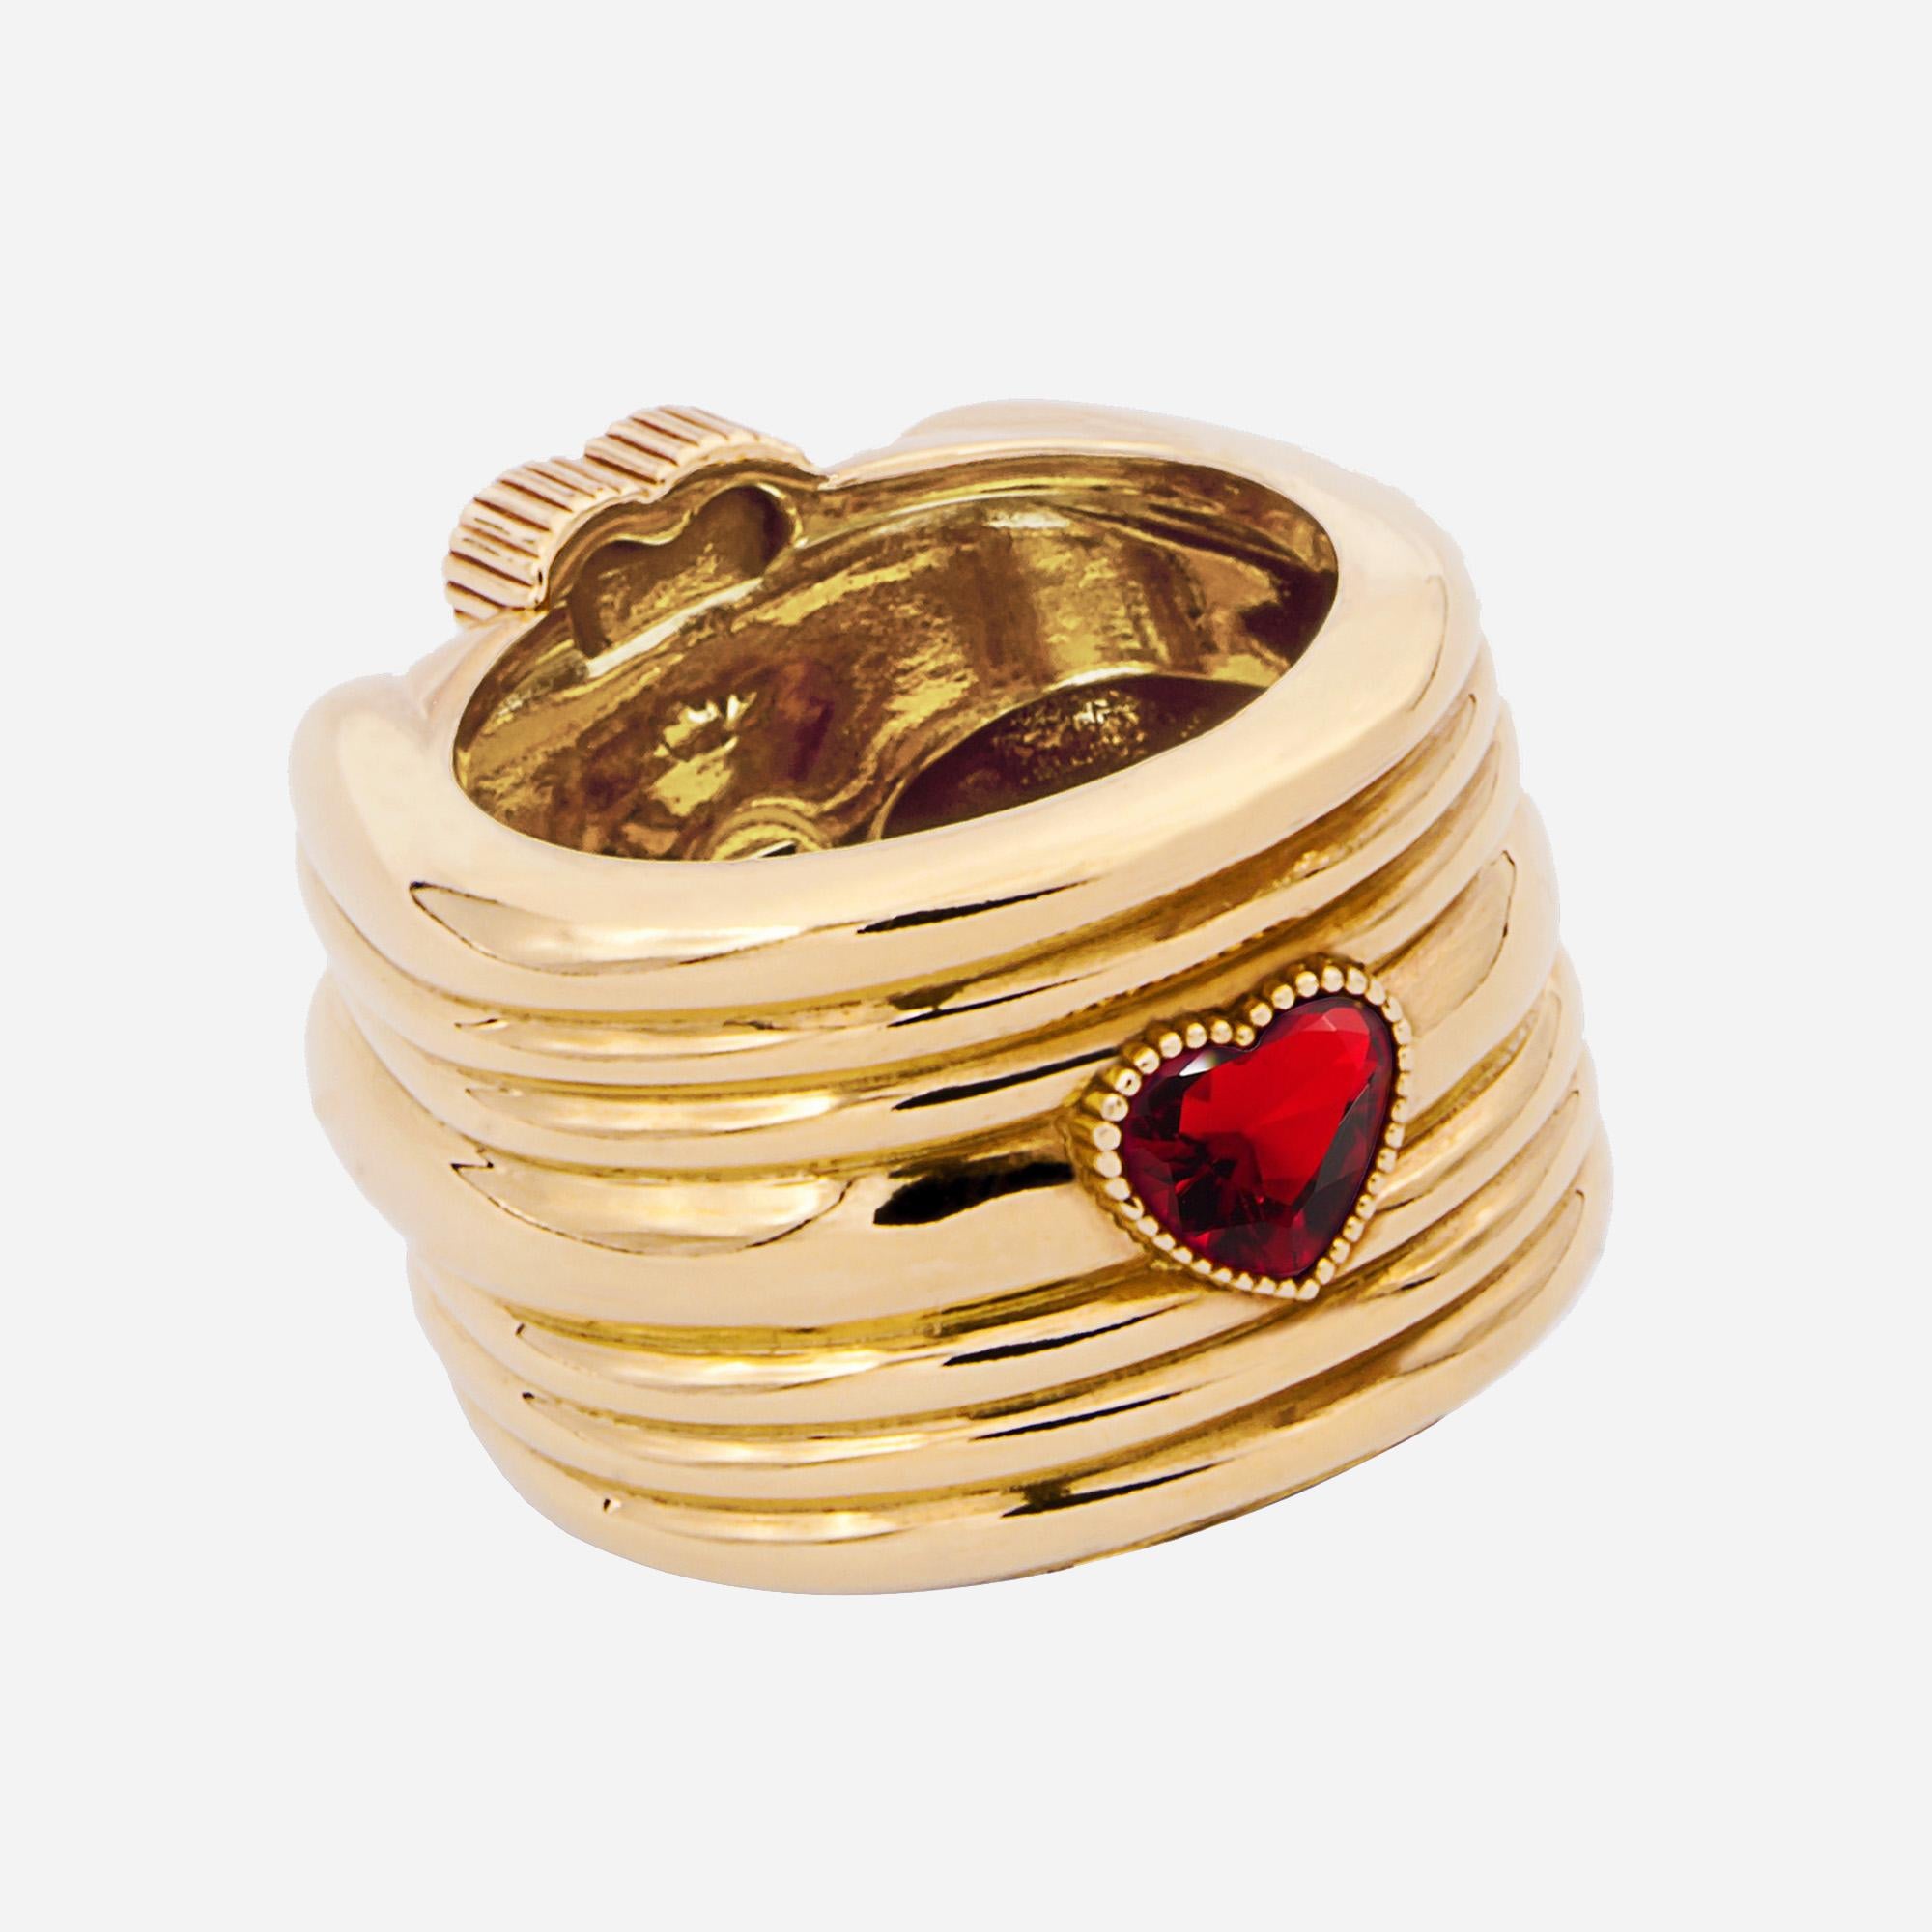 This ring is defined by an enveloping design and it is finished by a butterfly knurled pattern. On the top, it is embellished with three heart – cut red crystals.
In the lower part, it presents a small heart-cut red crystal that recalls the logo of